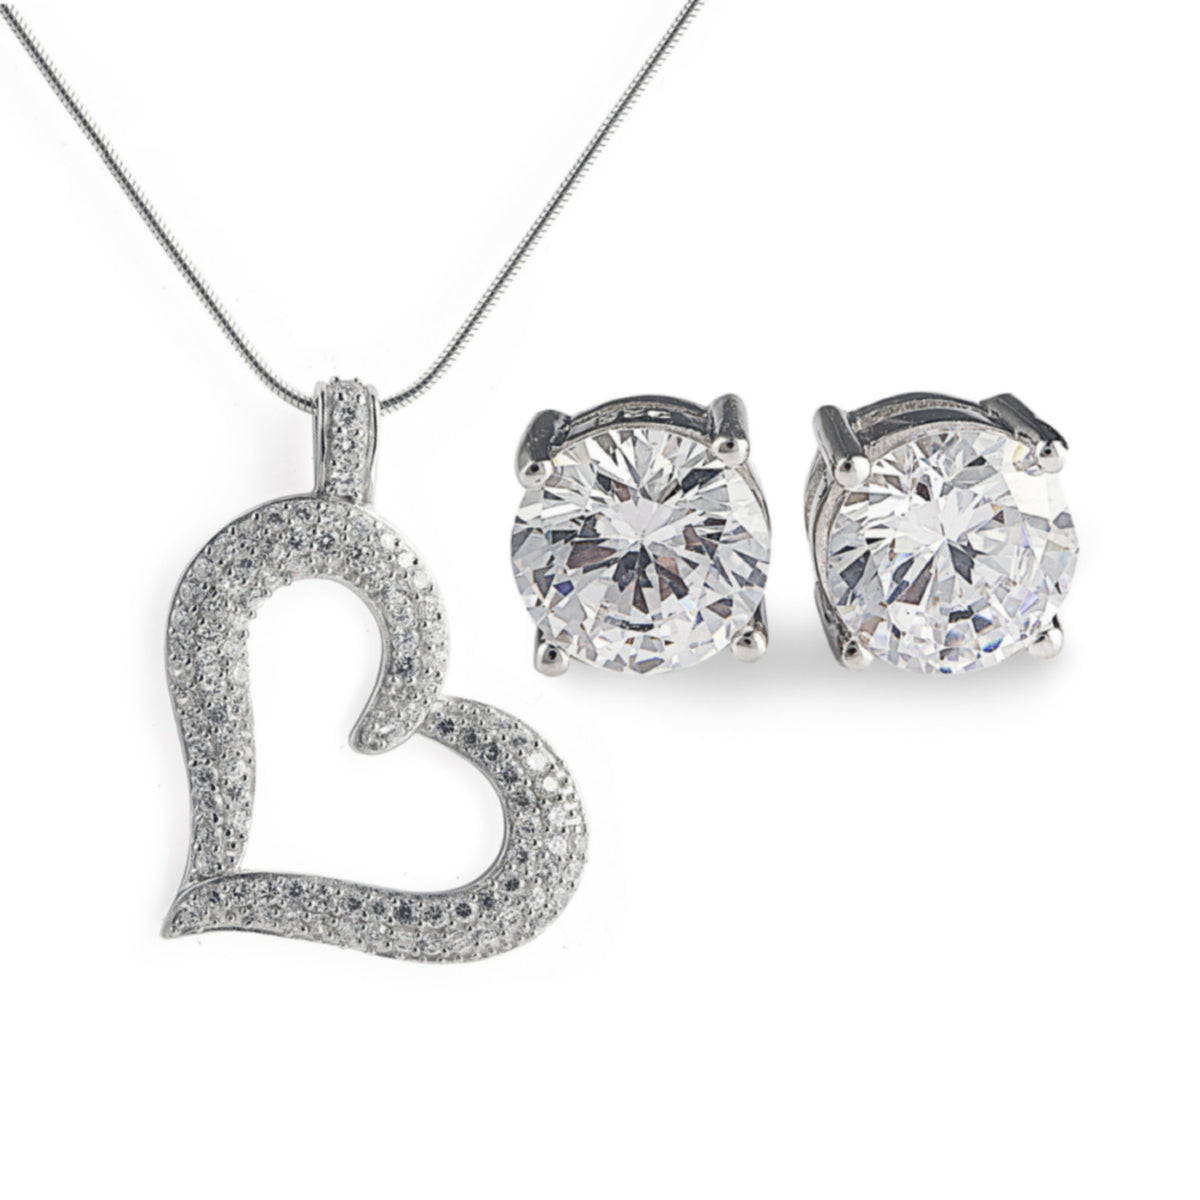 Diamond Heart Gift Set in 925 sterling silver with a necklace and stud earrings with cubic zirconia. Worldwide shipping from Australia. Affordable luxury jewellery by Bellagio & Co.